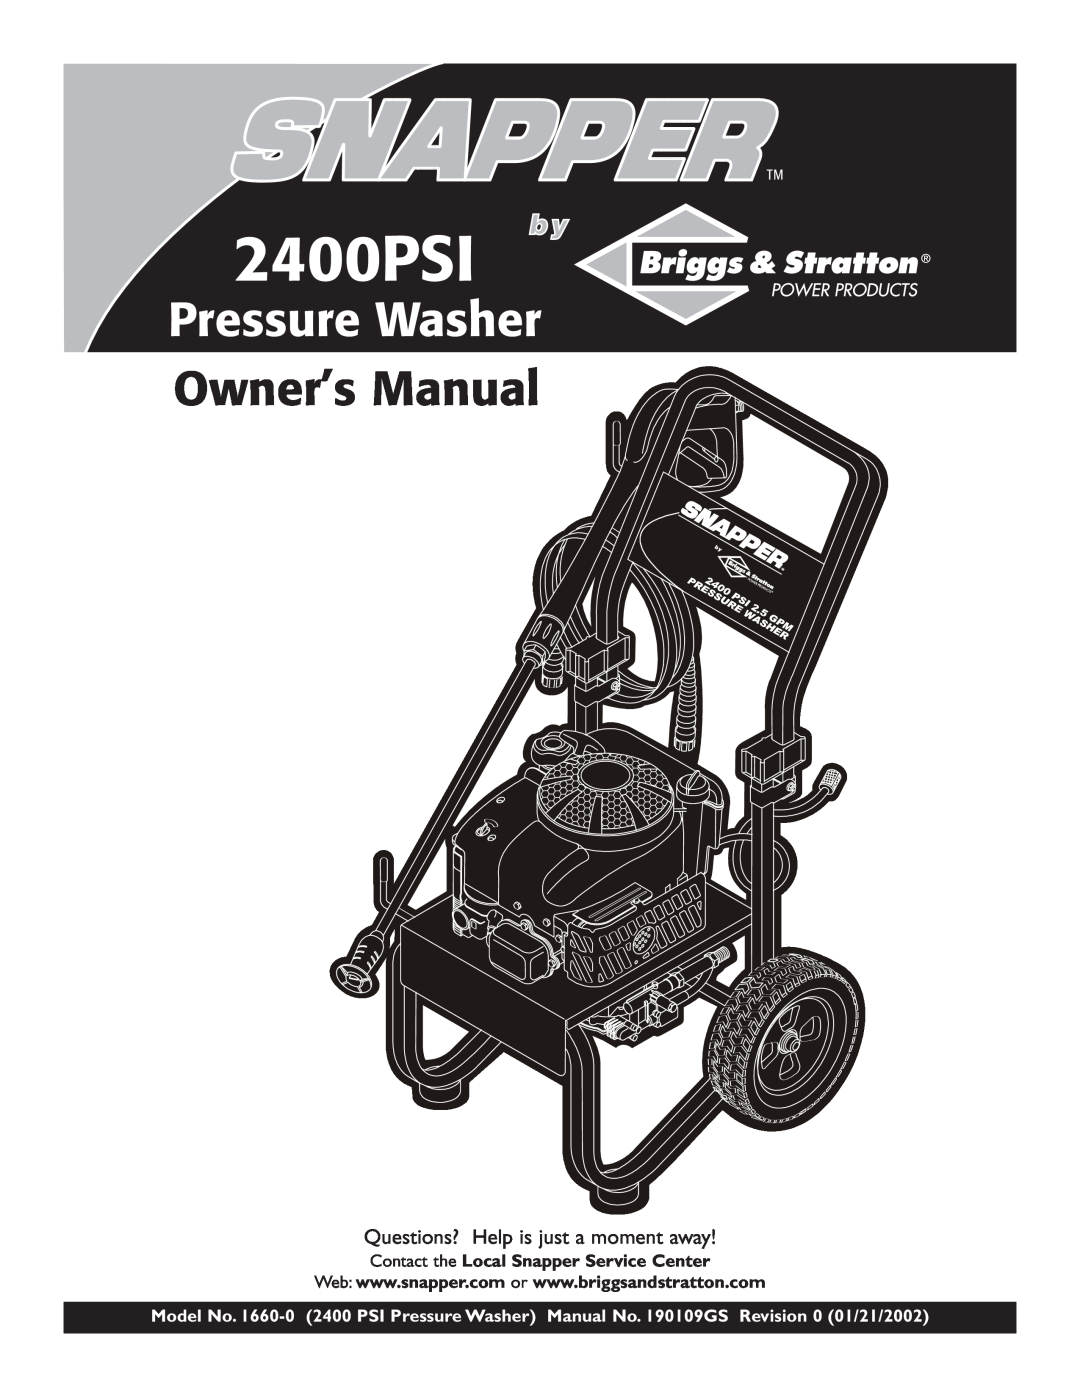 Snapper 1660-0 owner manual Questions? Help is just a moment away, Contact the Local Snapper Service Center, 2400PSI 